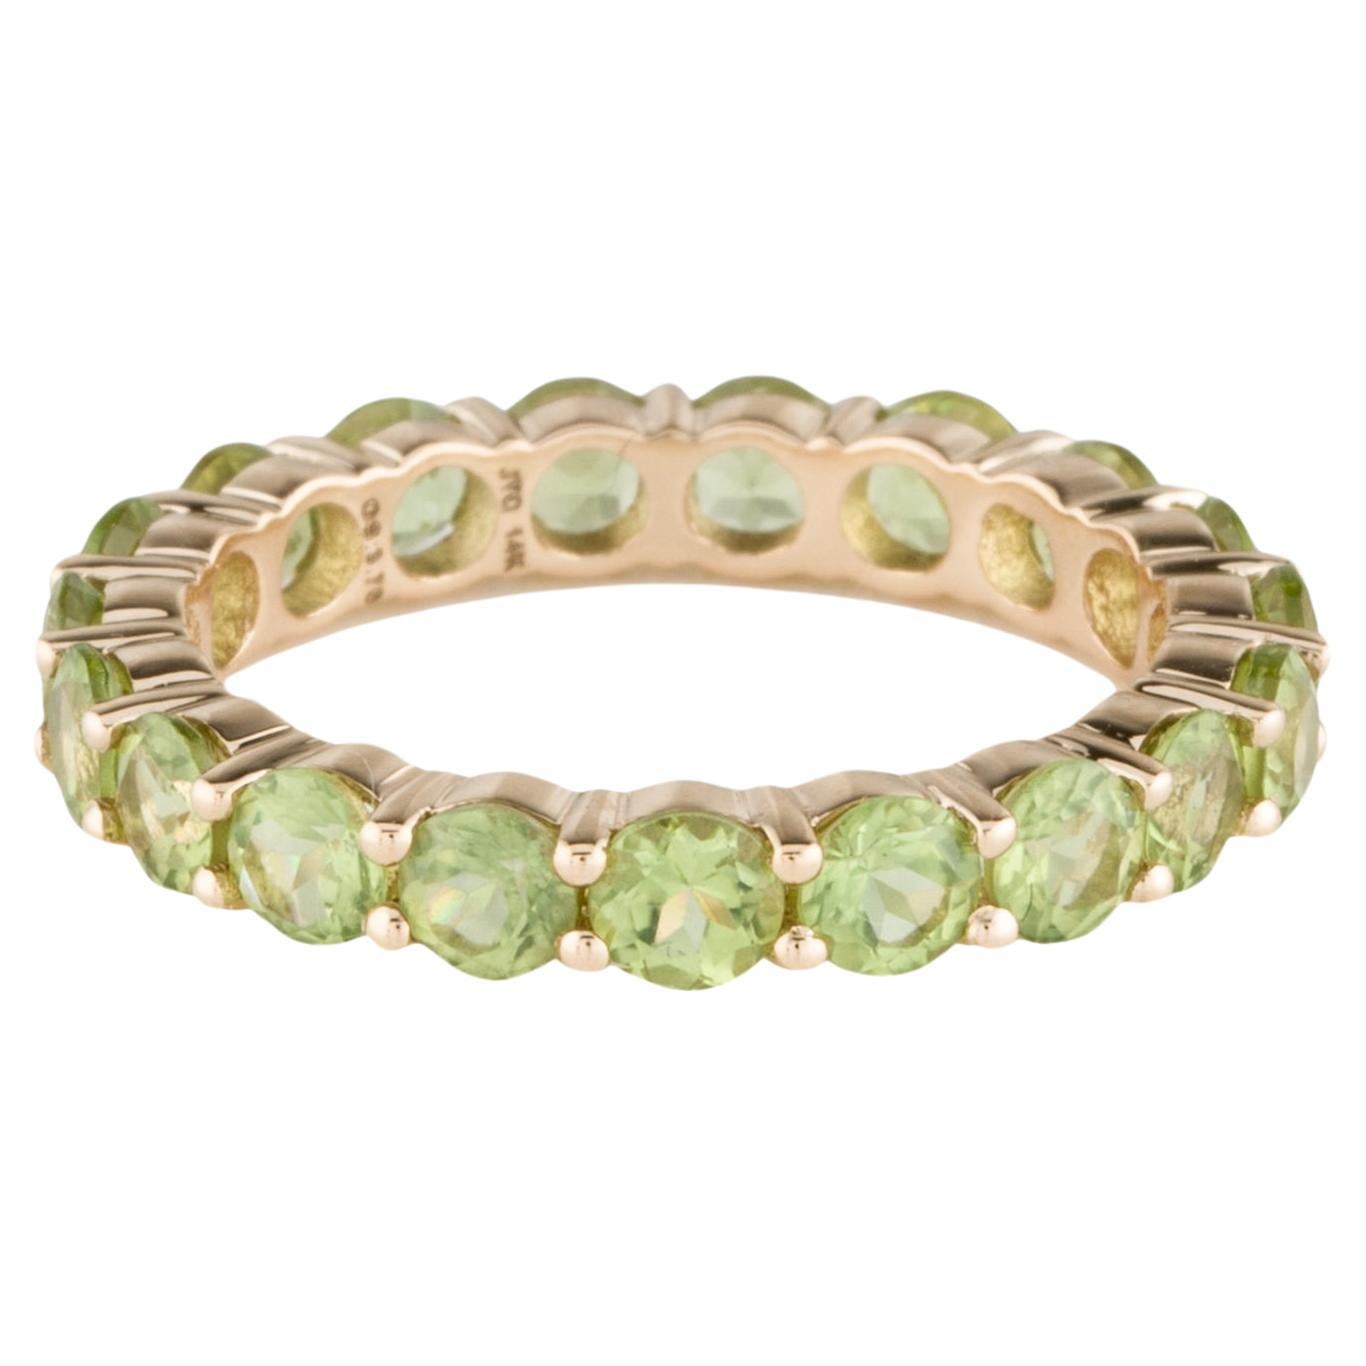  Elegant 14K Yellow Gold Peridot Eternity Band with Faceted Round Peridots